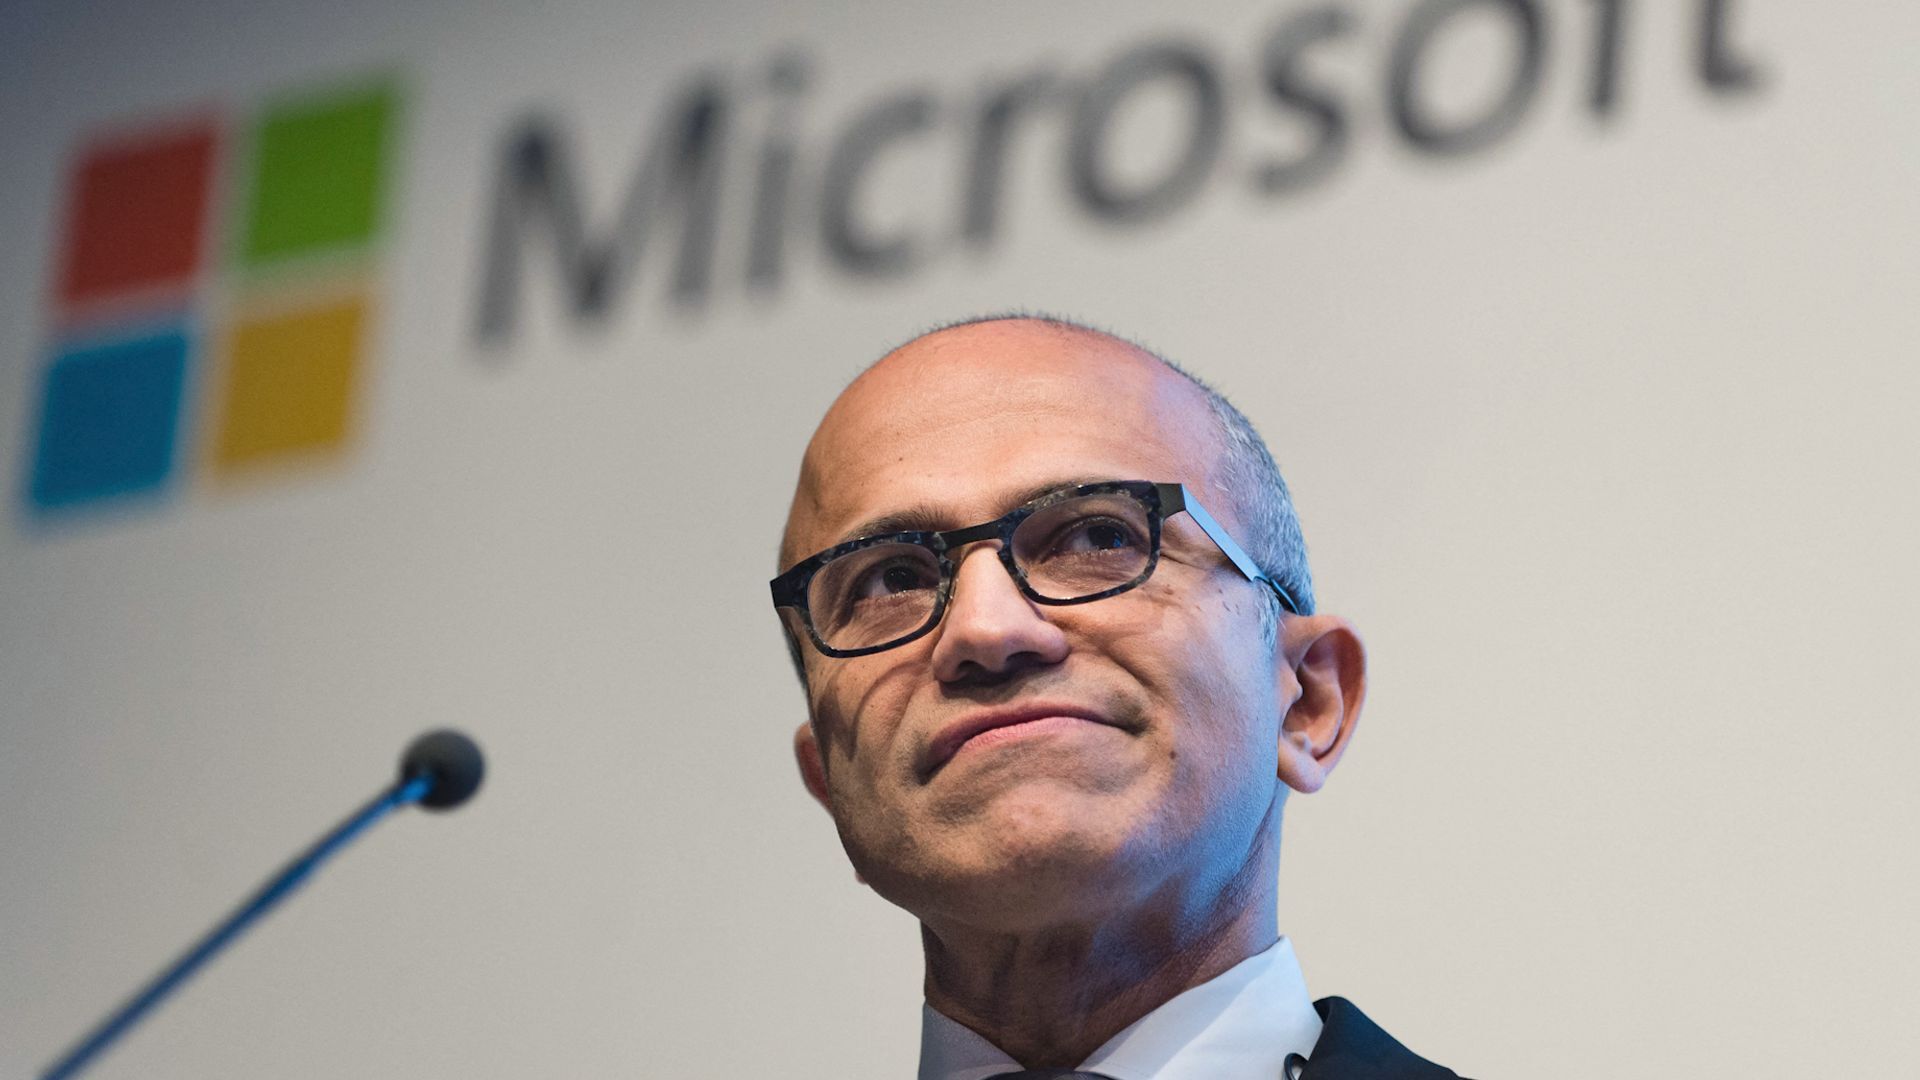 Microsoft has signed a record-breaking deal to invest over  billion in renewable energy capacity to power AI technology at data centers.